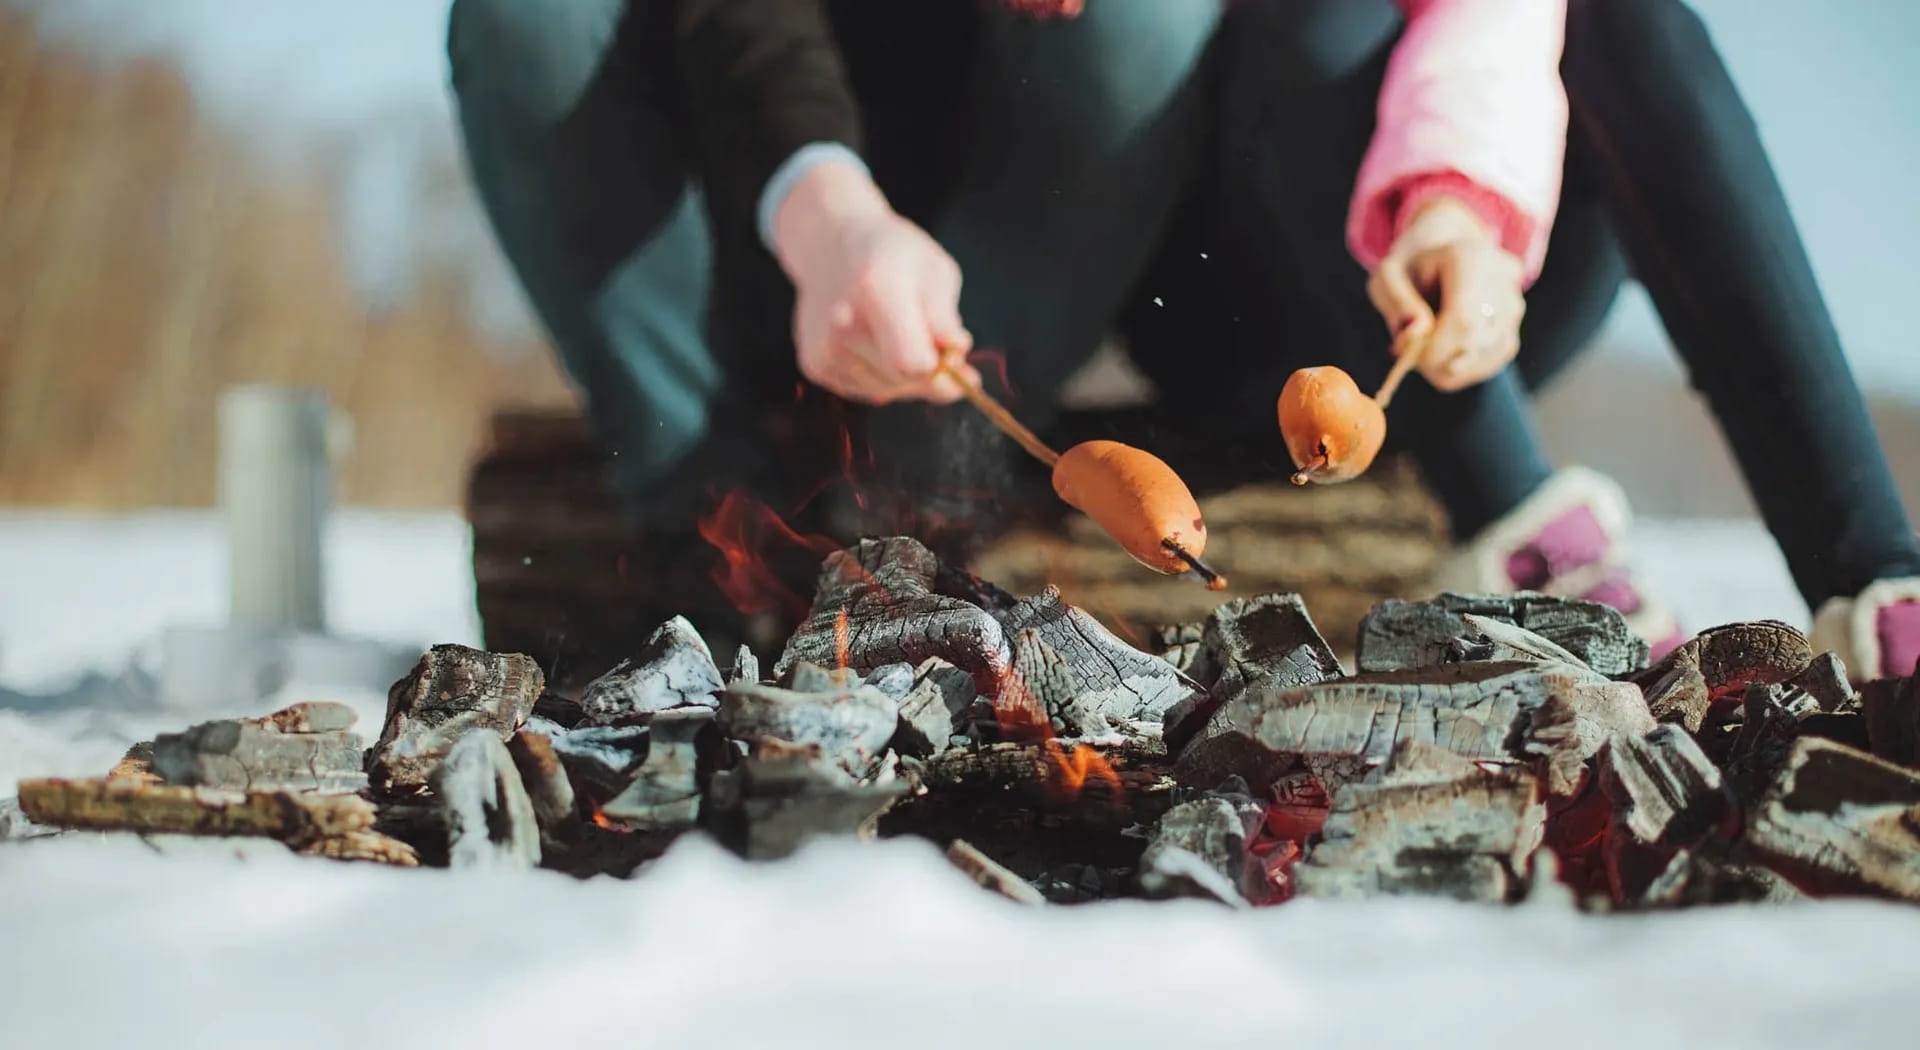 Barbecue in winter: how to do it